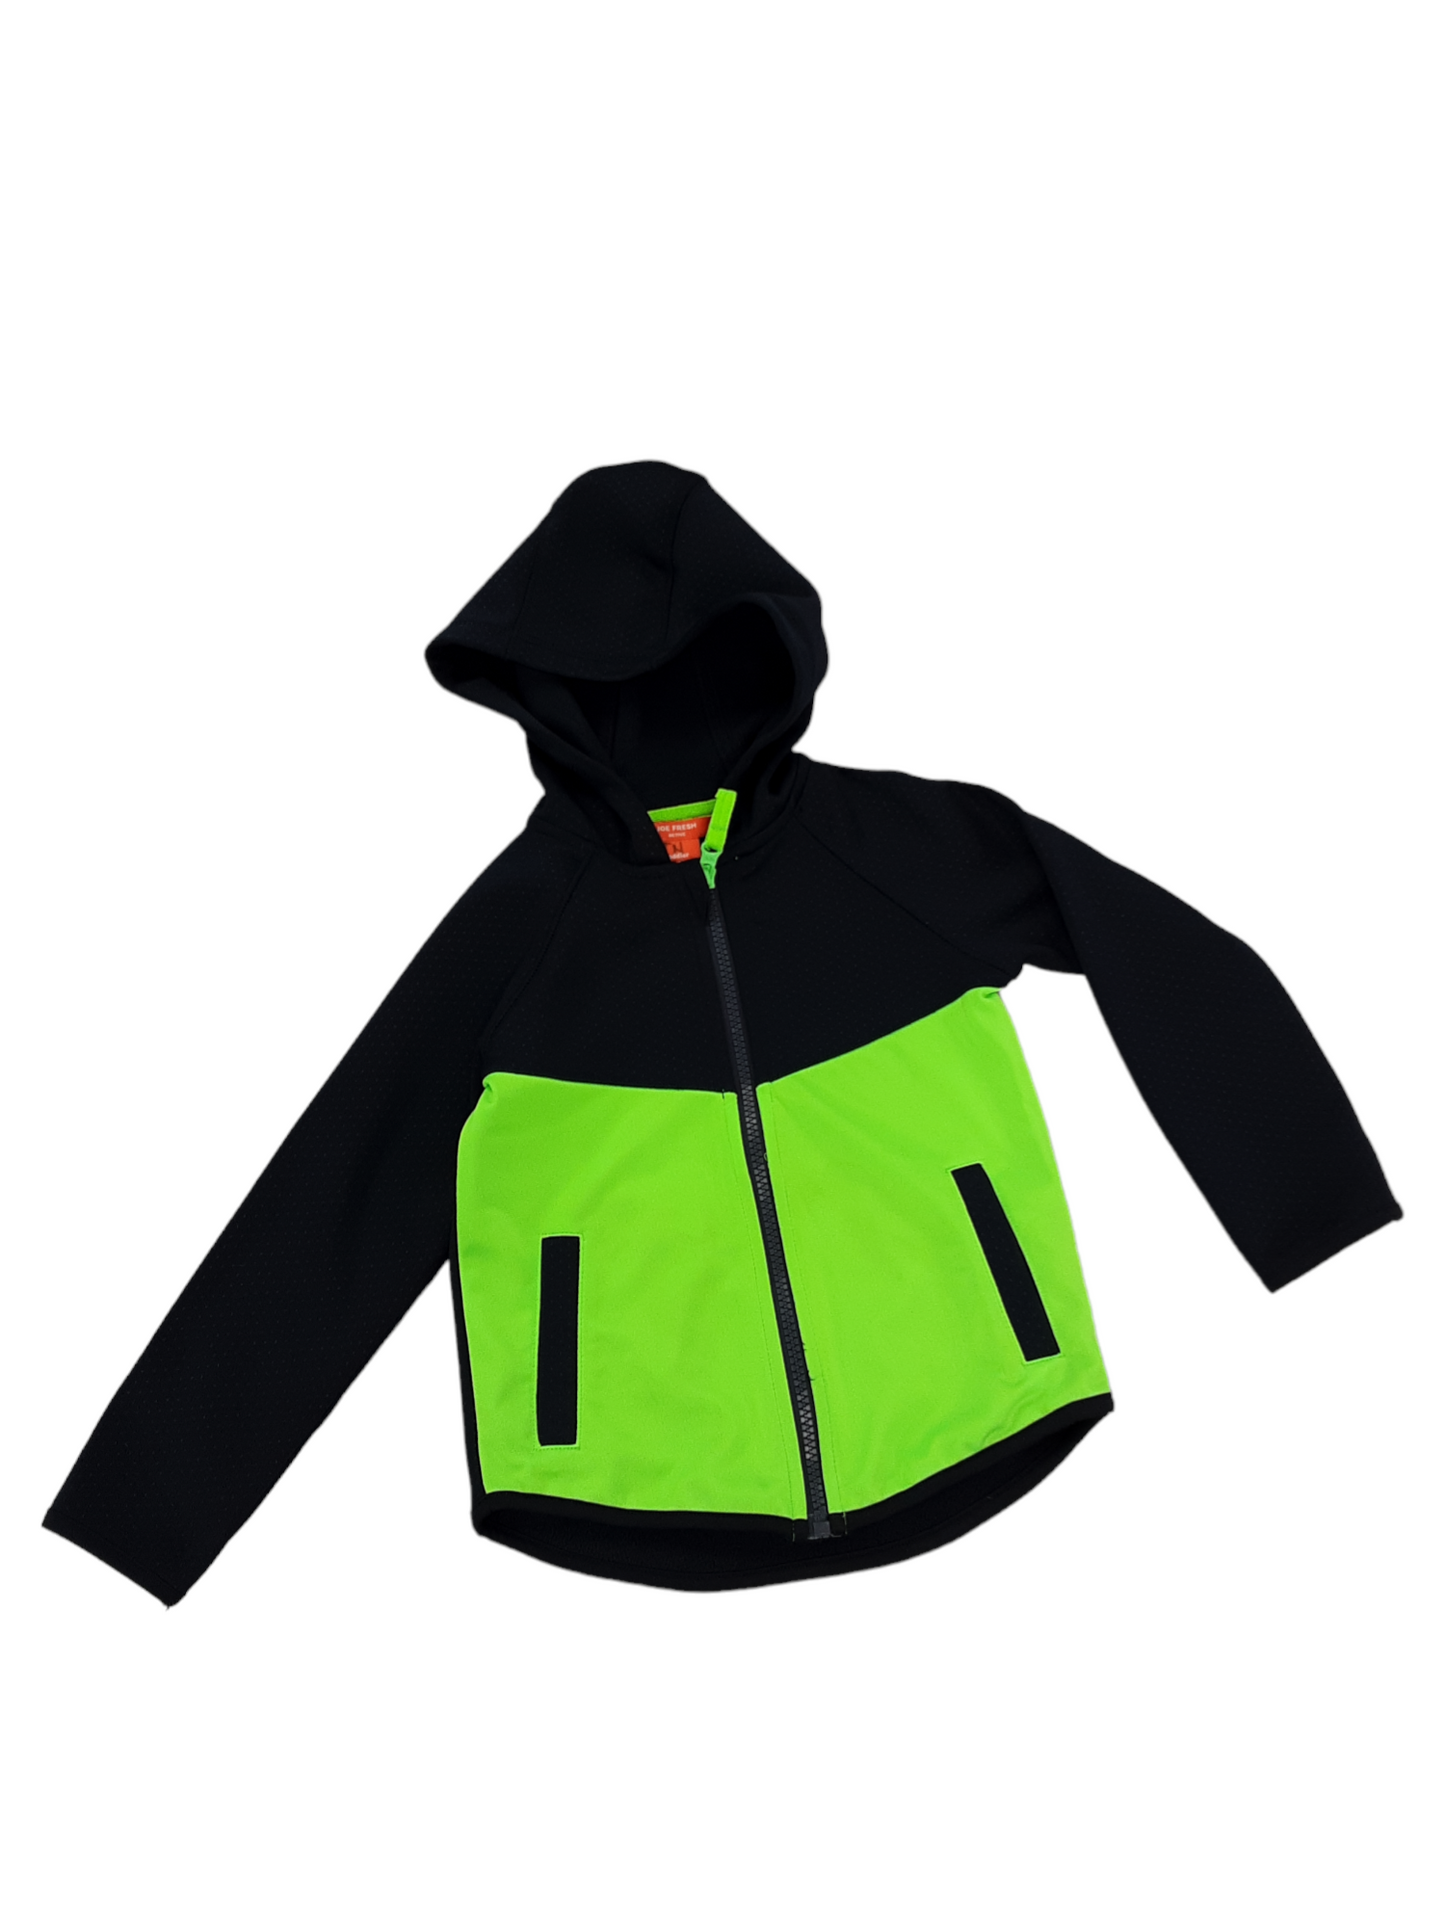 Black and lime green zip up size 3t